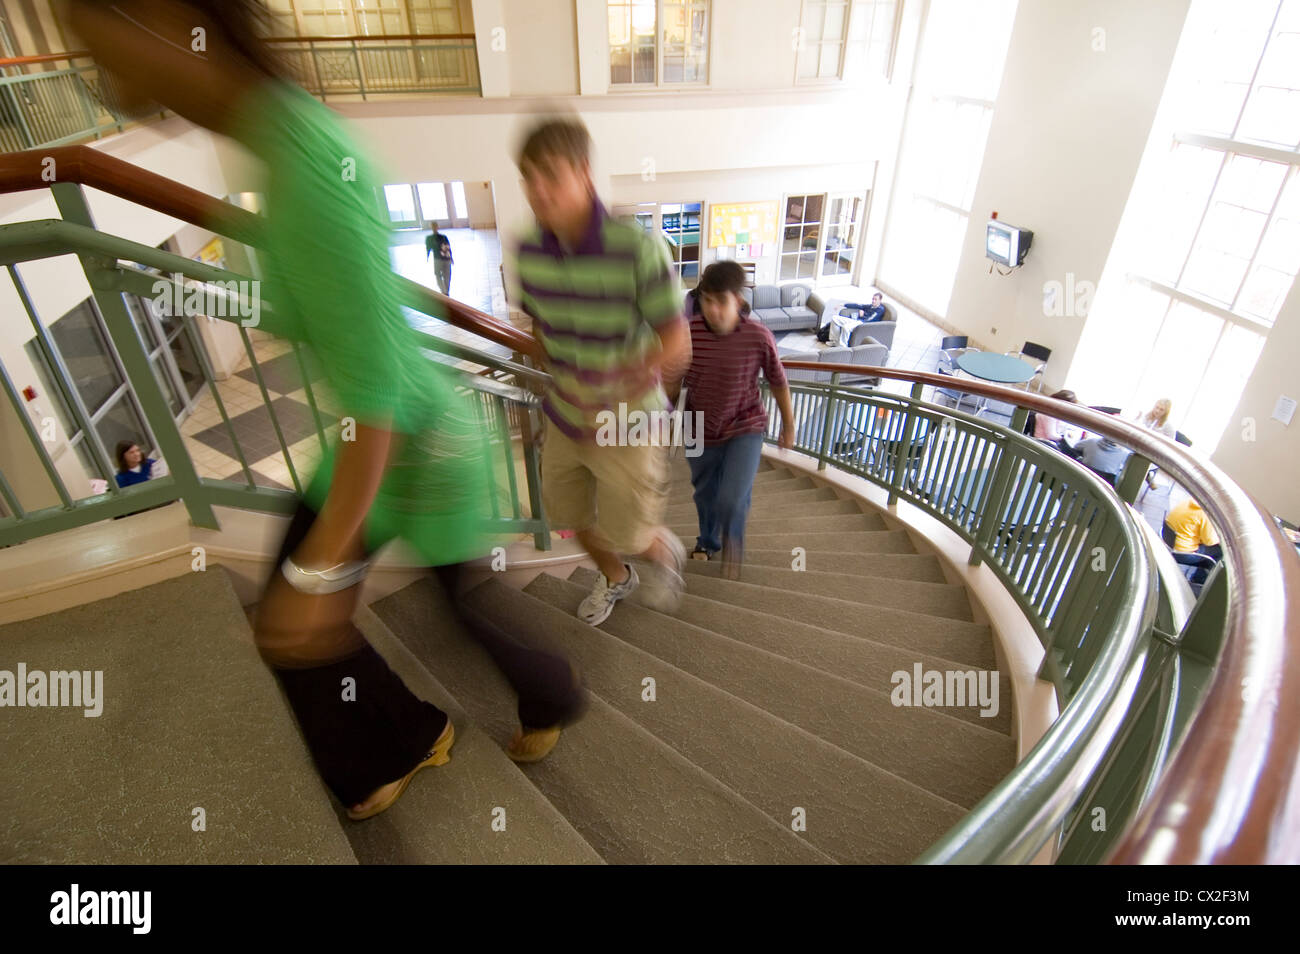 College students climb stairs as they go between classes. Stock Photo